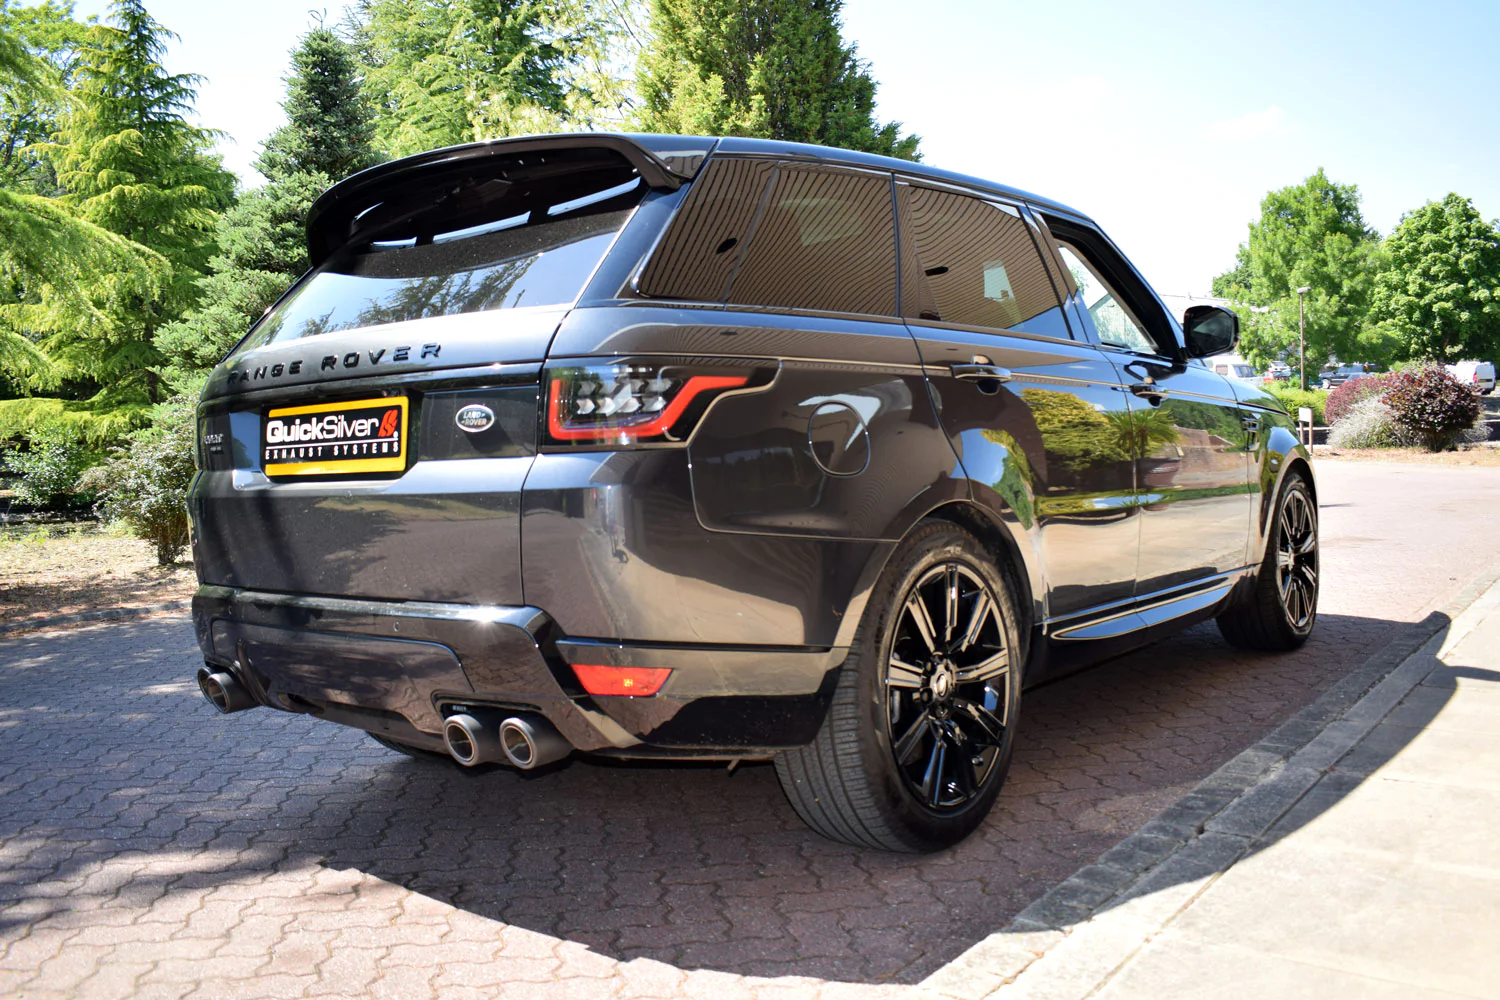 When should a Range Rover's exhaust be replaced?